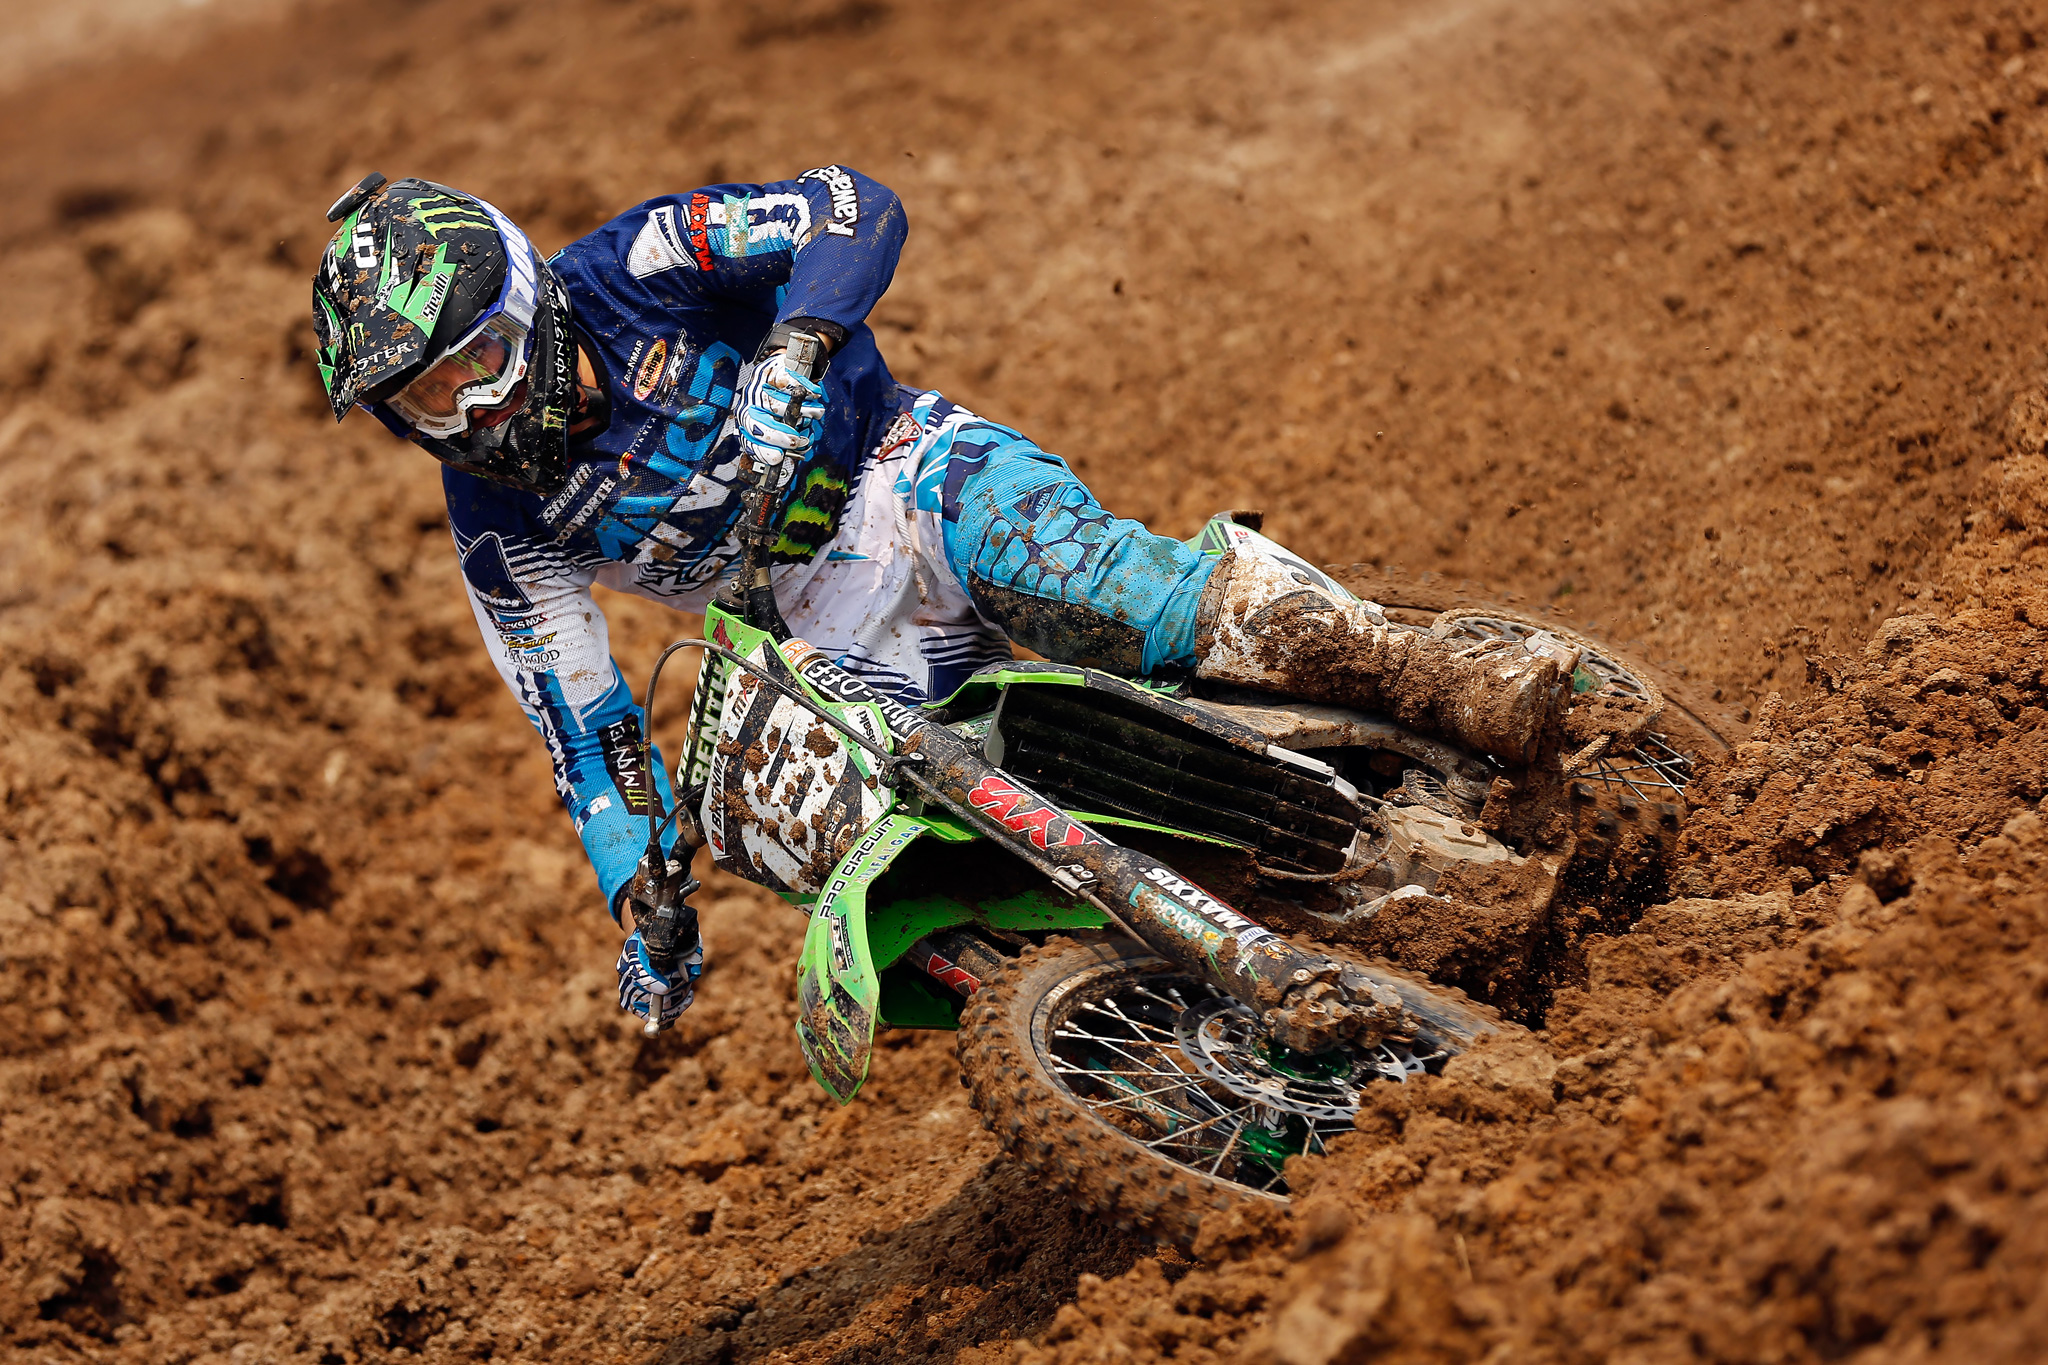 Vsevolod Brylyakov took 6th overall in the MX2 during Round 2 of the 2016 MXGP series